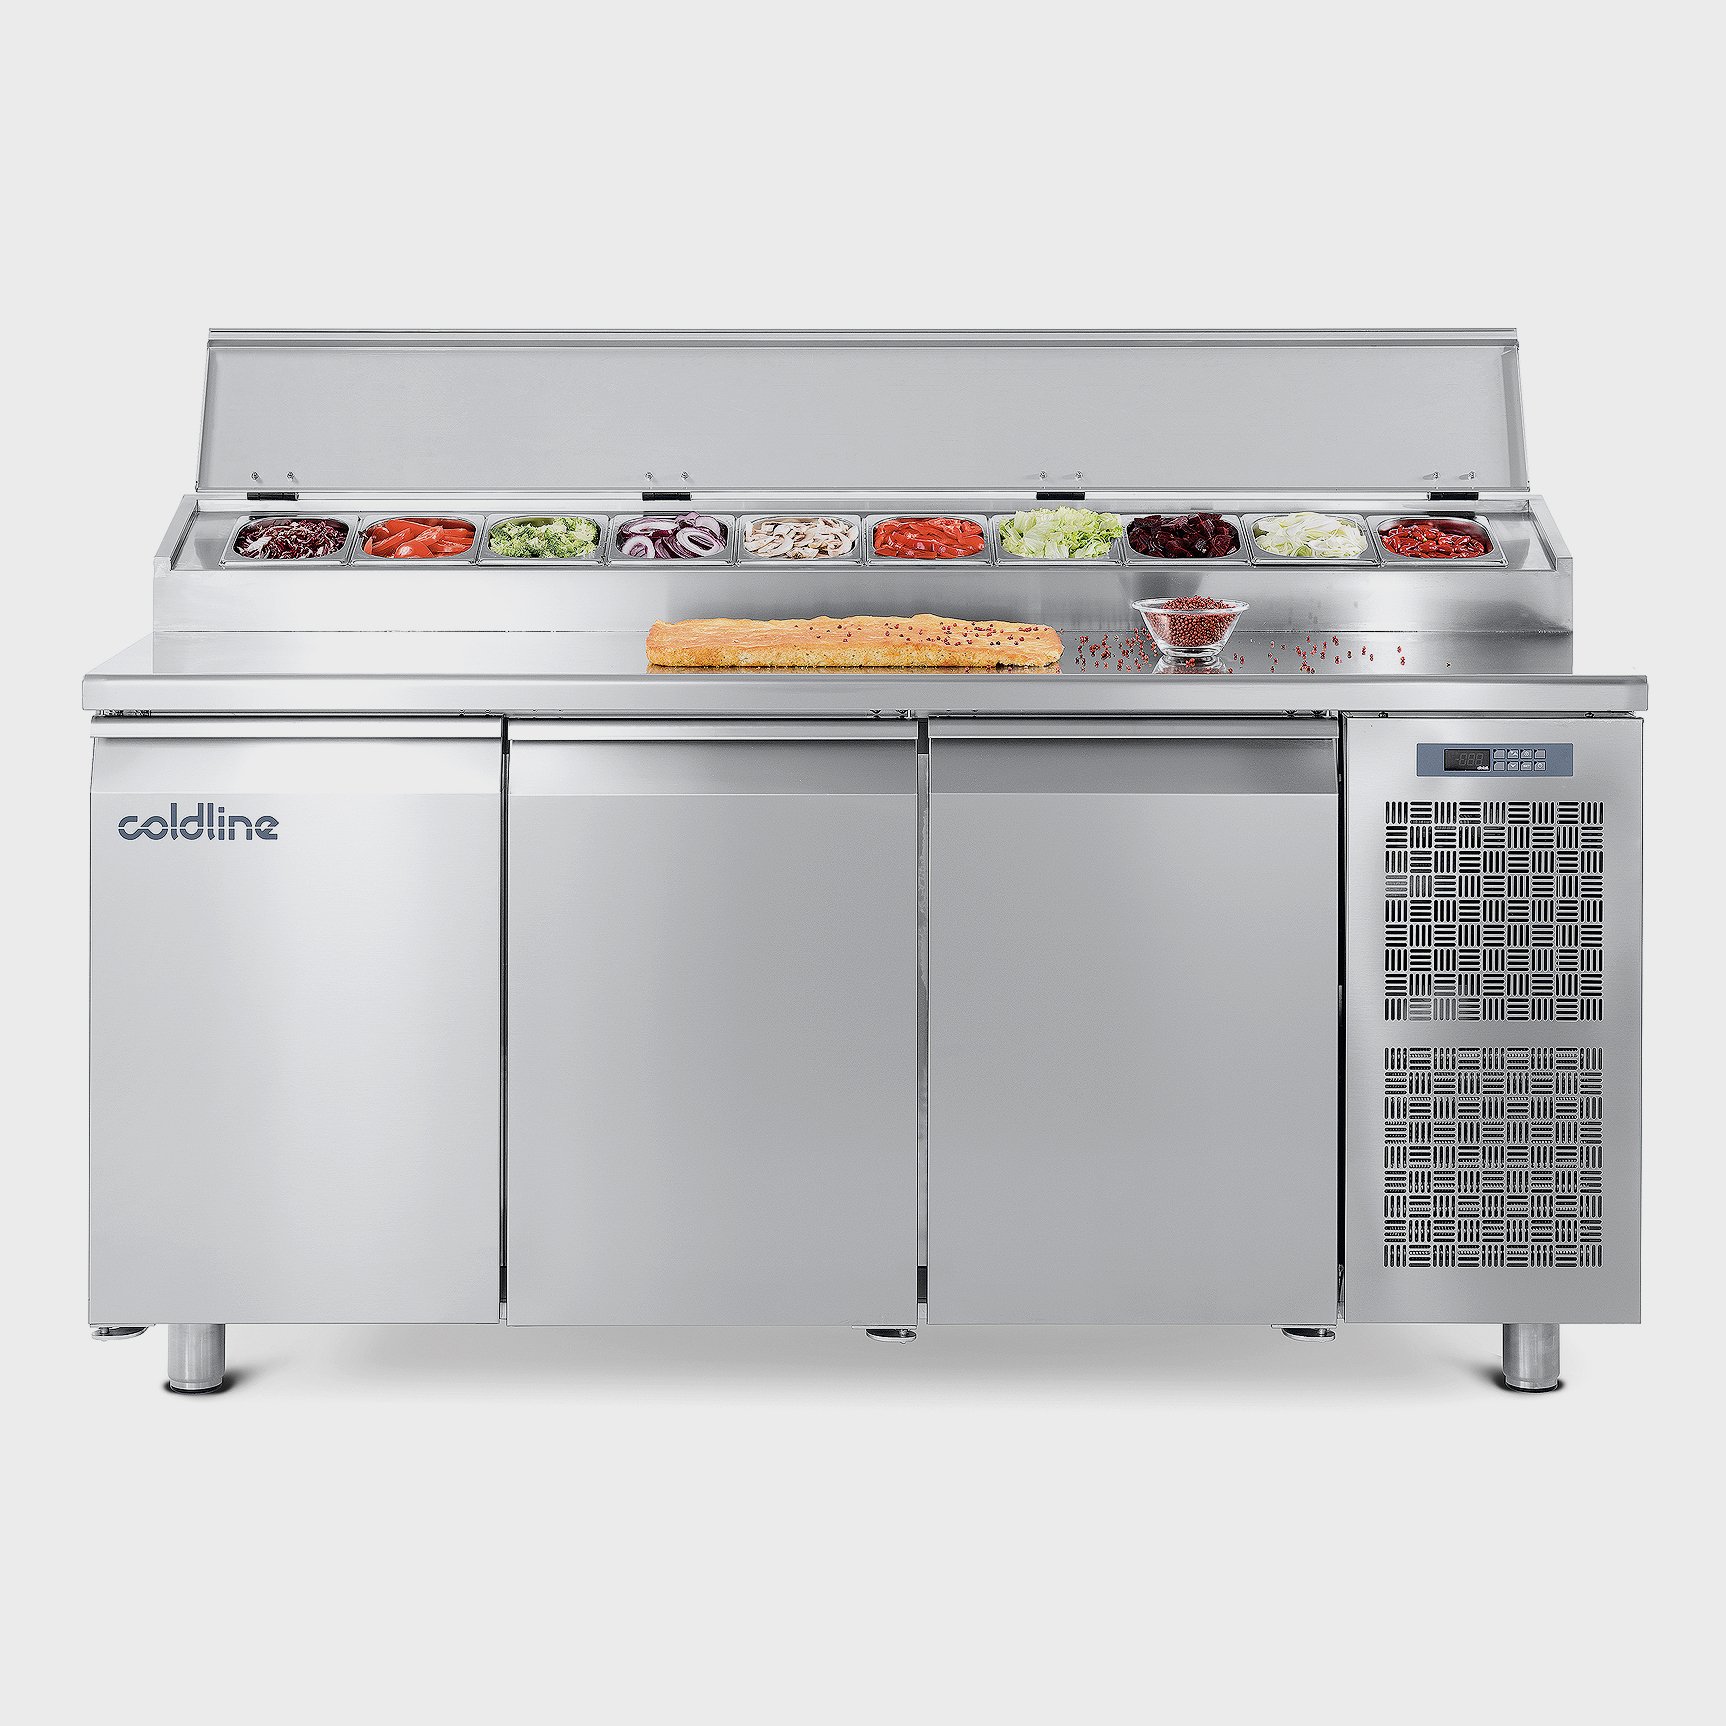 Coldline refrigerated counter